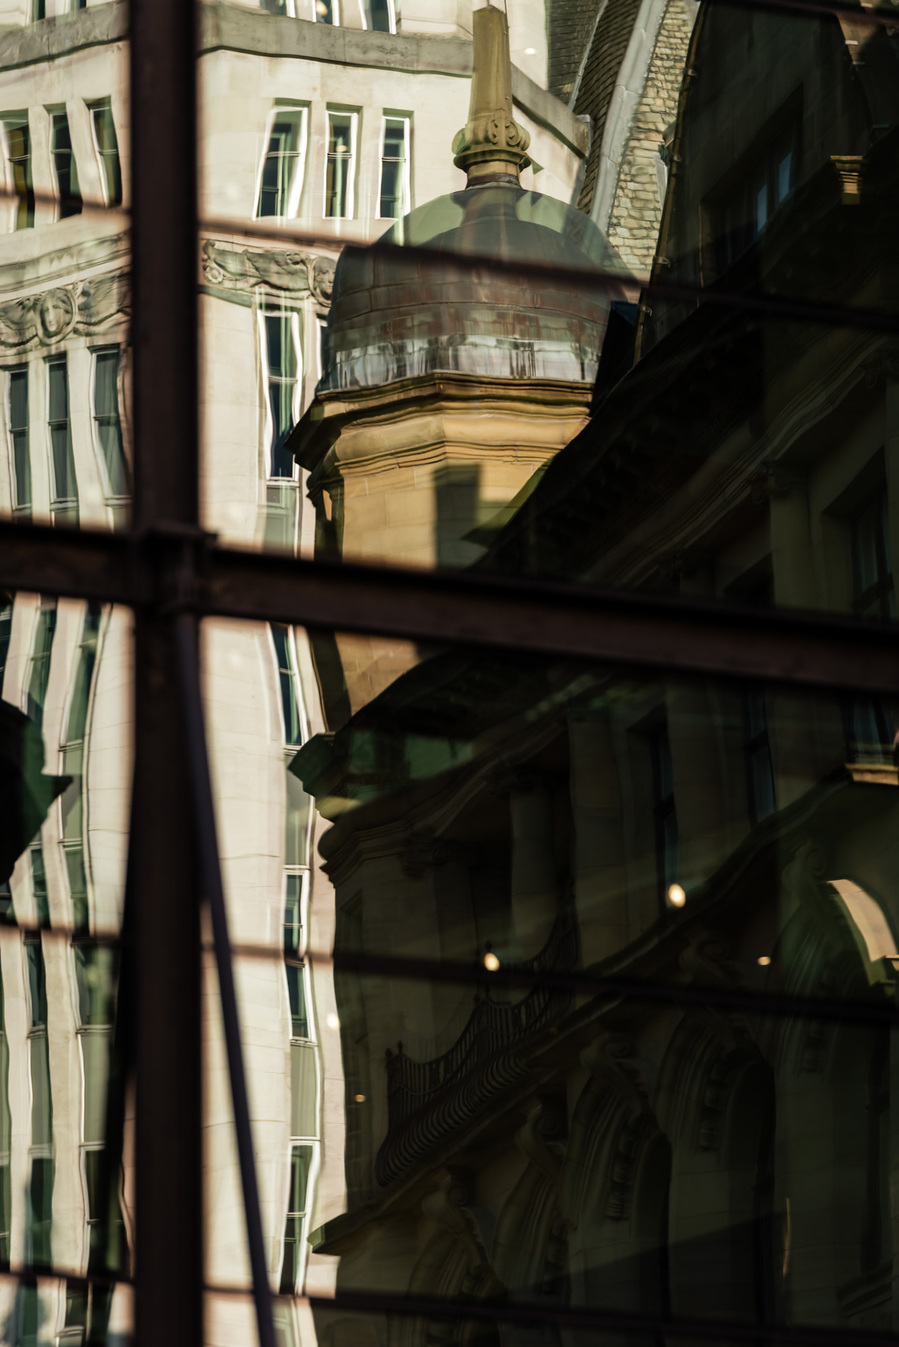 Abstract city photography showing manchester buildings reflected in glass of another building. image appears warped by the reflections.